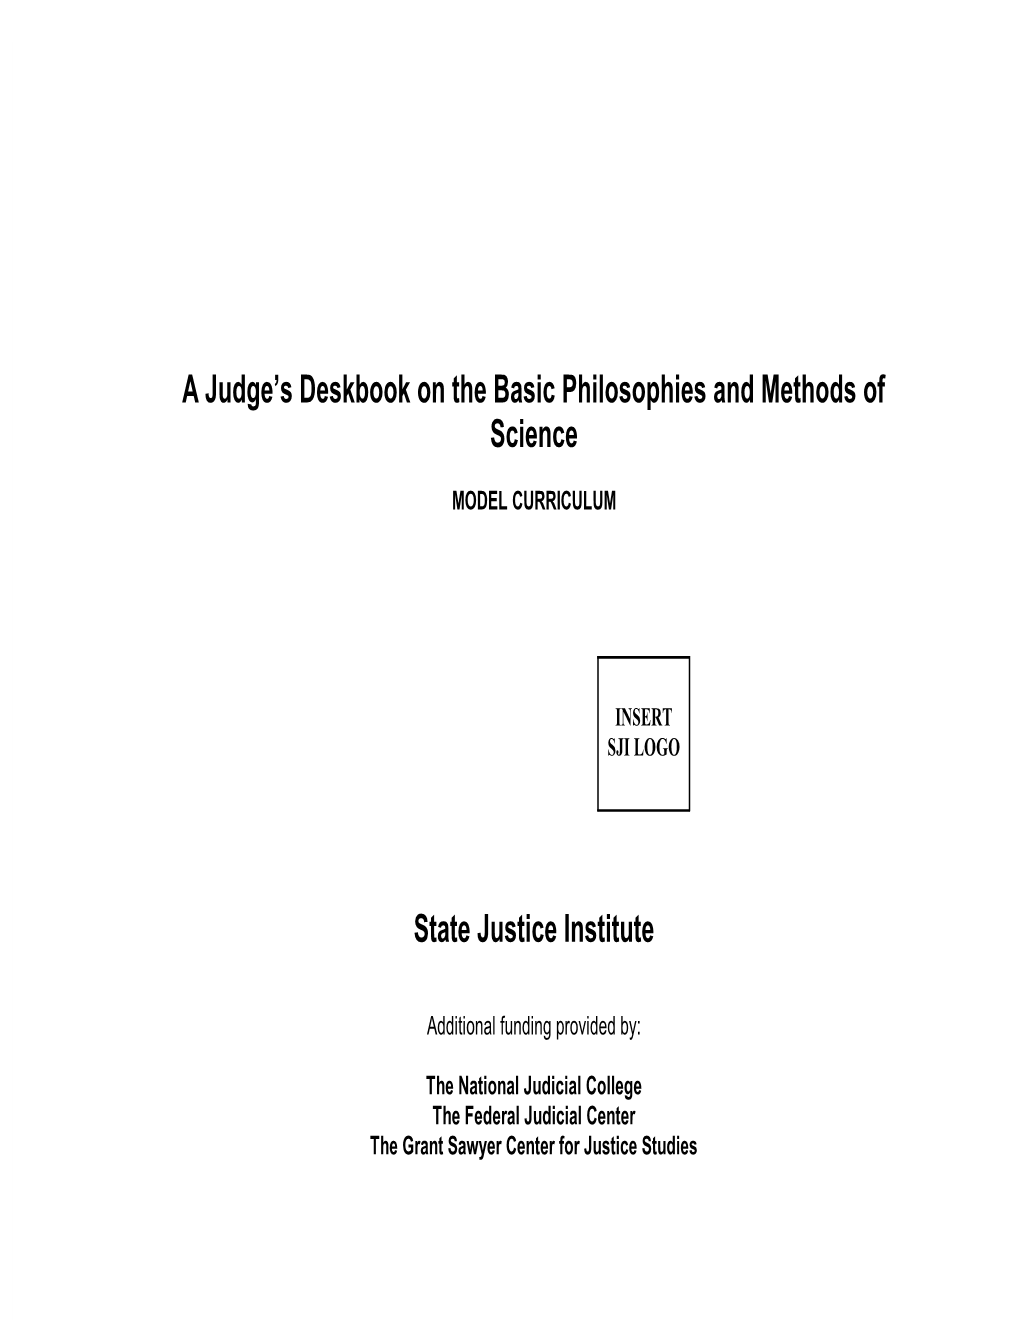 A Judge's Deskbook on the Basic Philosophies and Methods Of